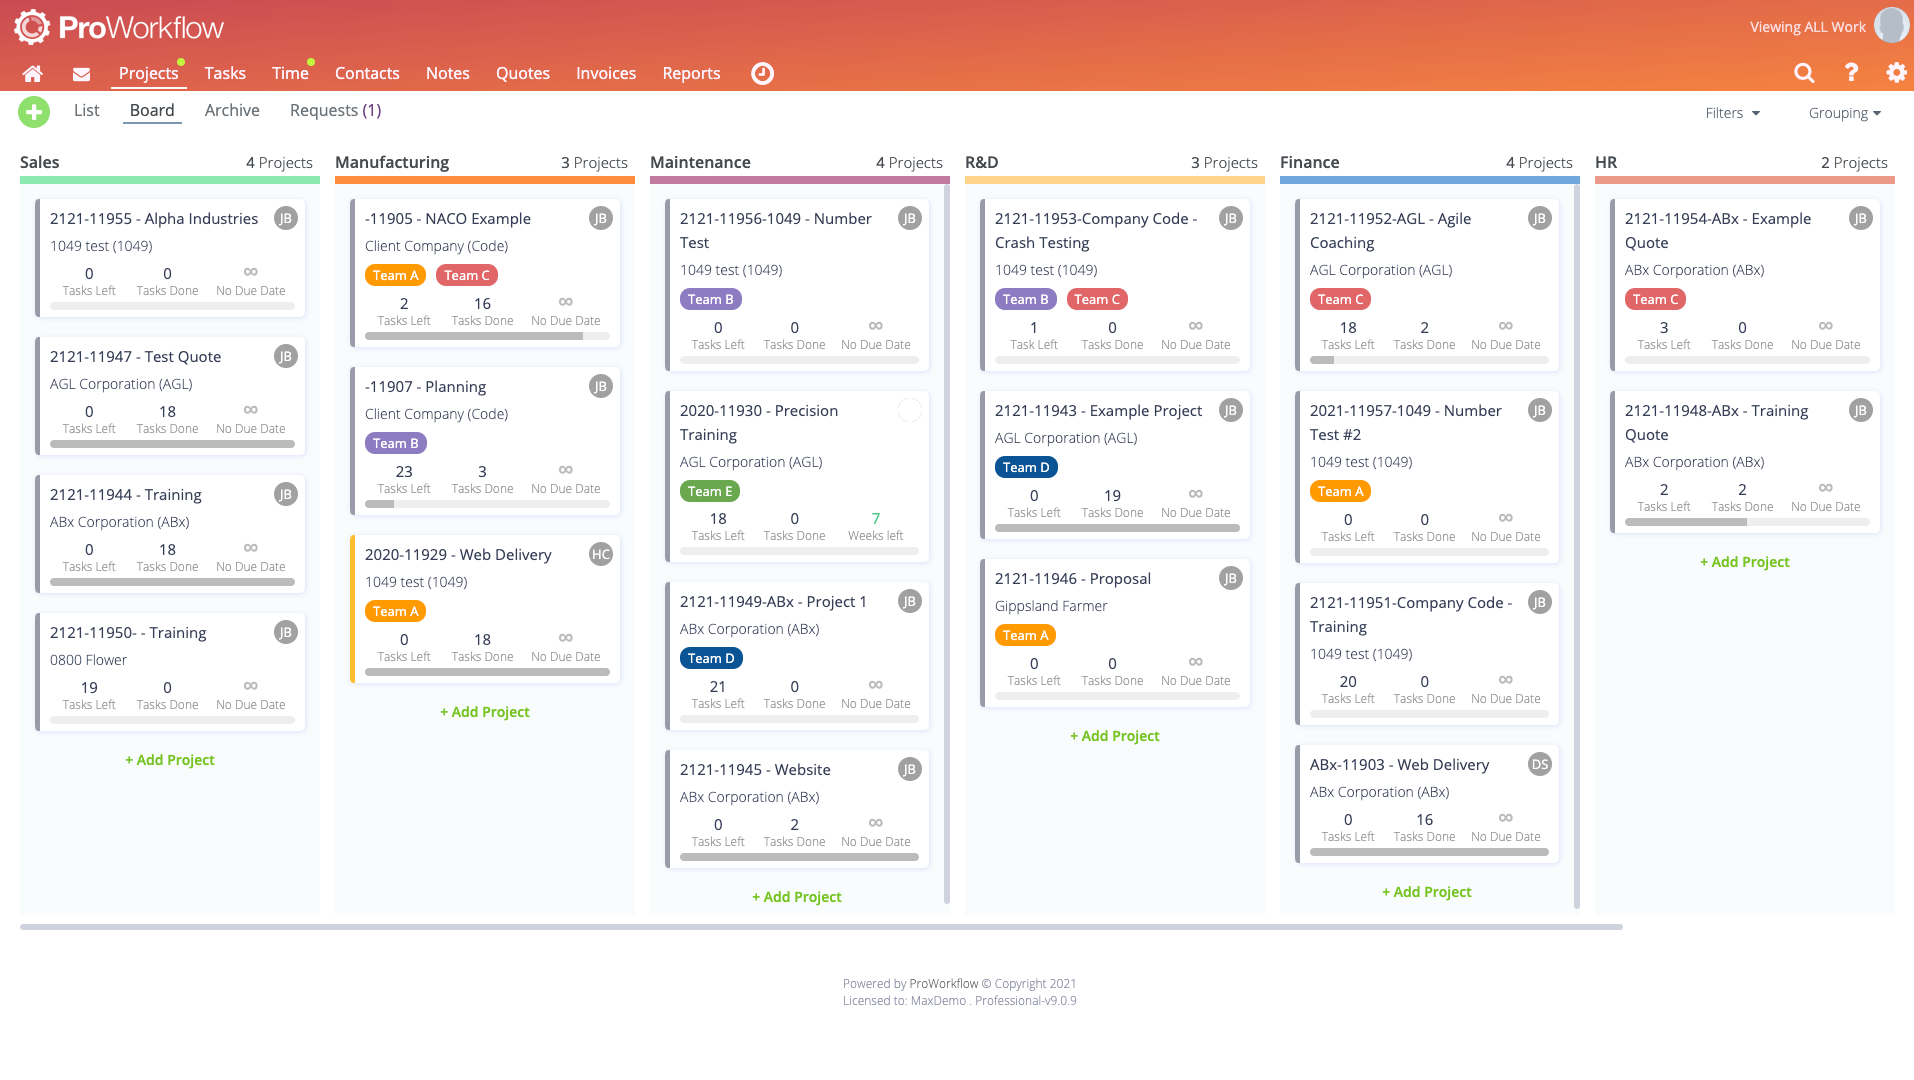 ProWorkflow Software - Kanban Board- agile project management tool designed to help visualize work, limit work-in-progress, and maximize efficiency